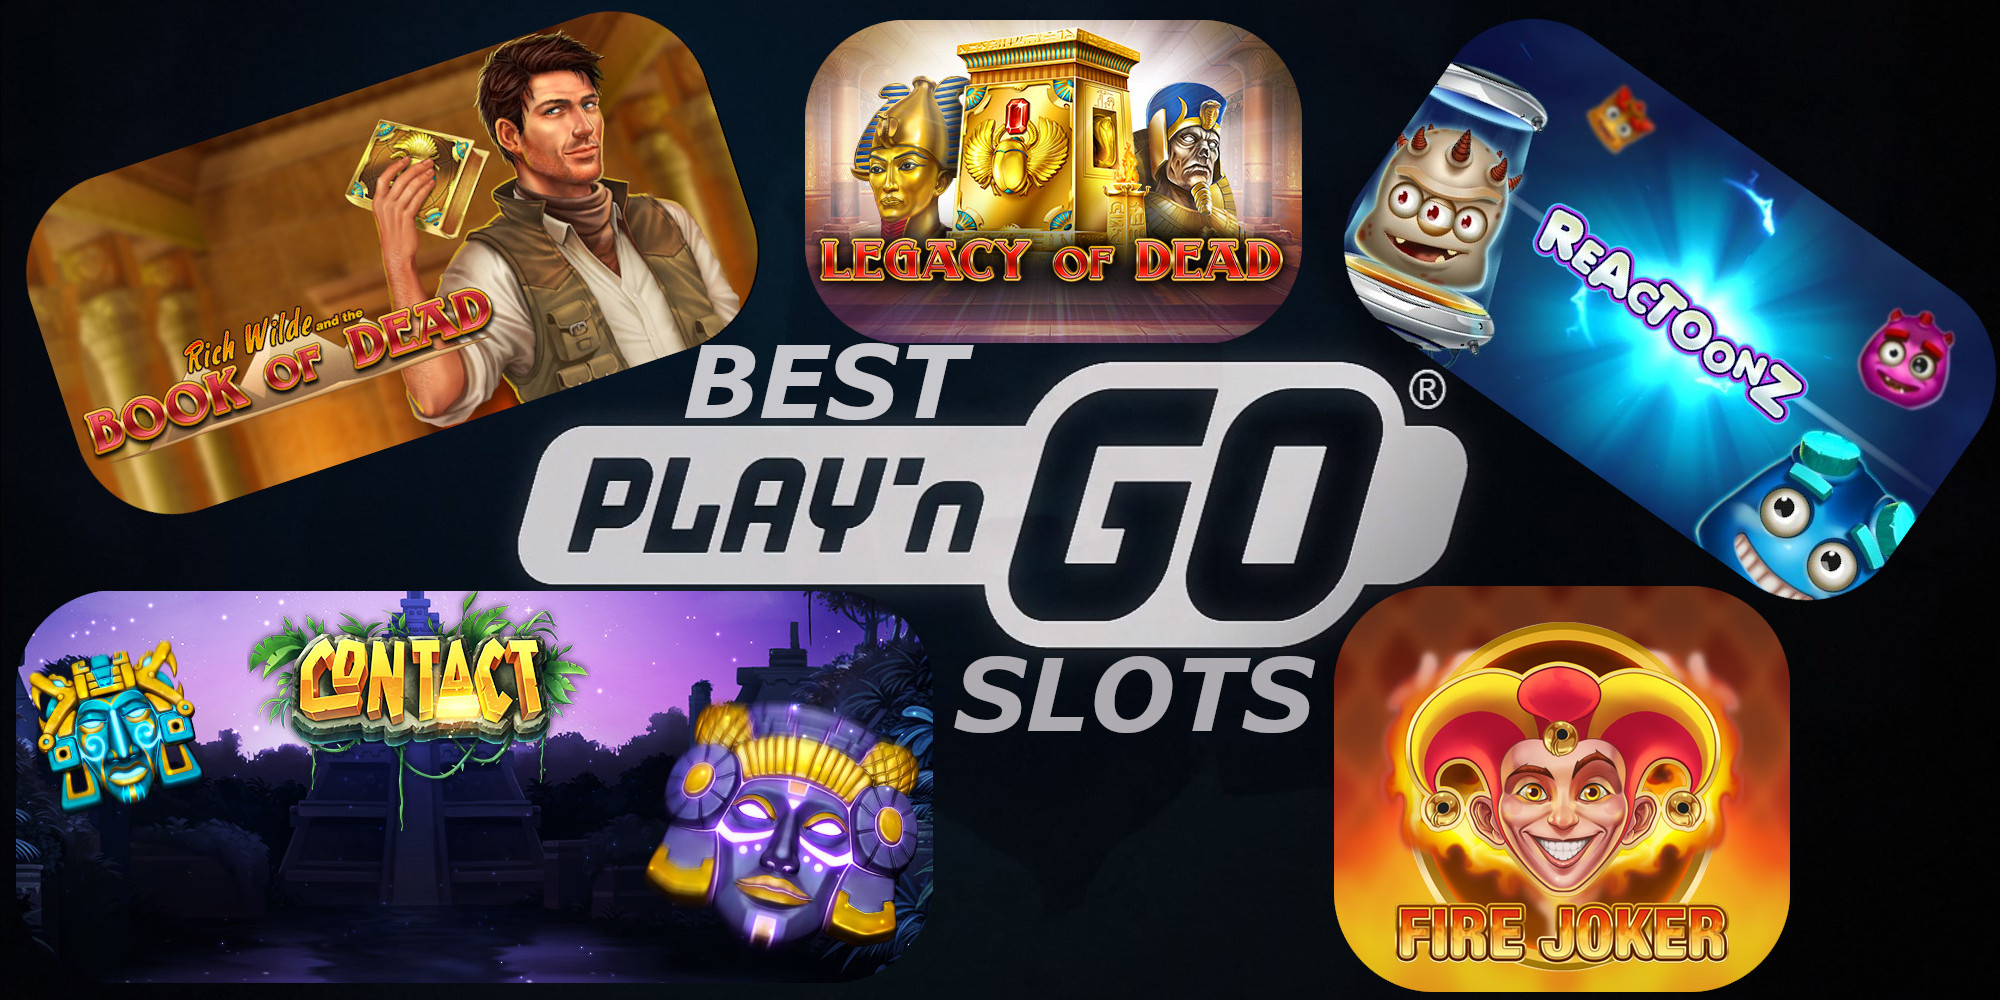 Play'n GO Excellence Unveiled: Top Slots, Mobile Casinos, and More